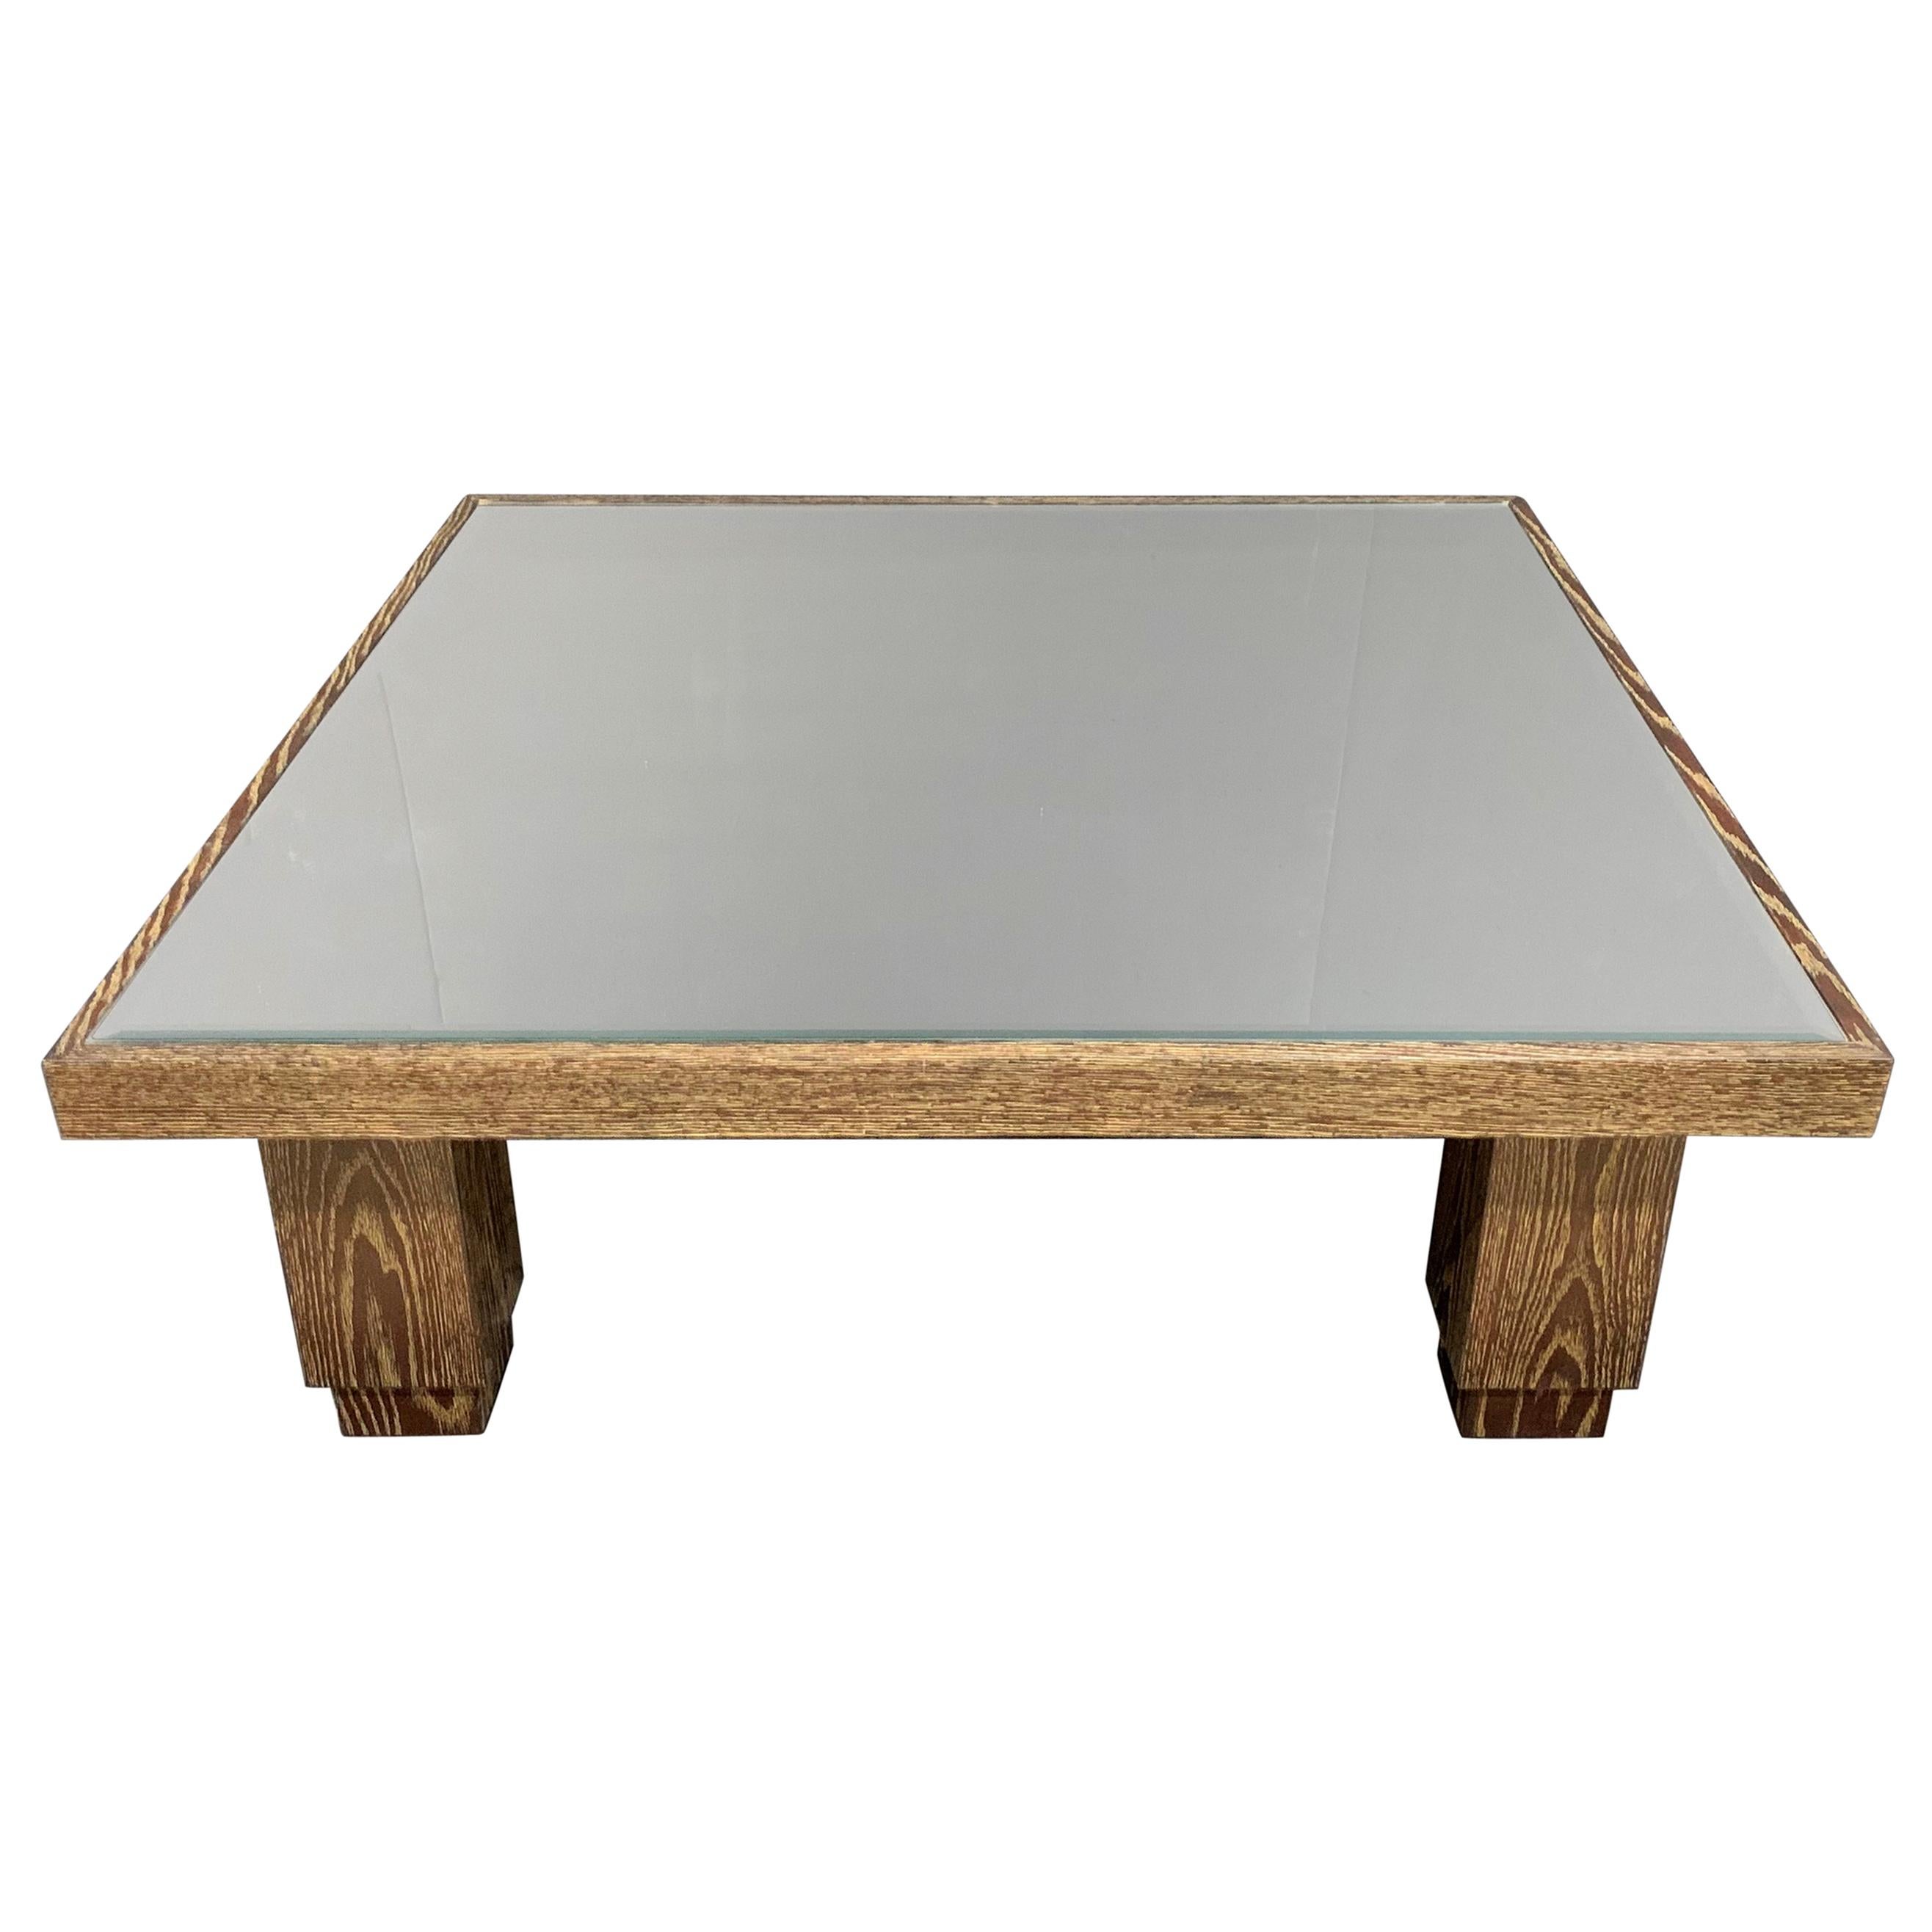 Wonderful Large Mid-Century Modern Square Wood Mirrored Coffee Cocktail Table